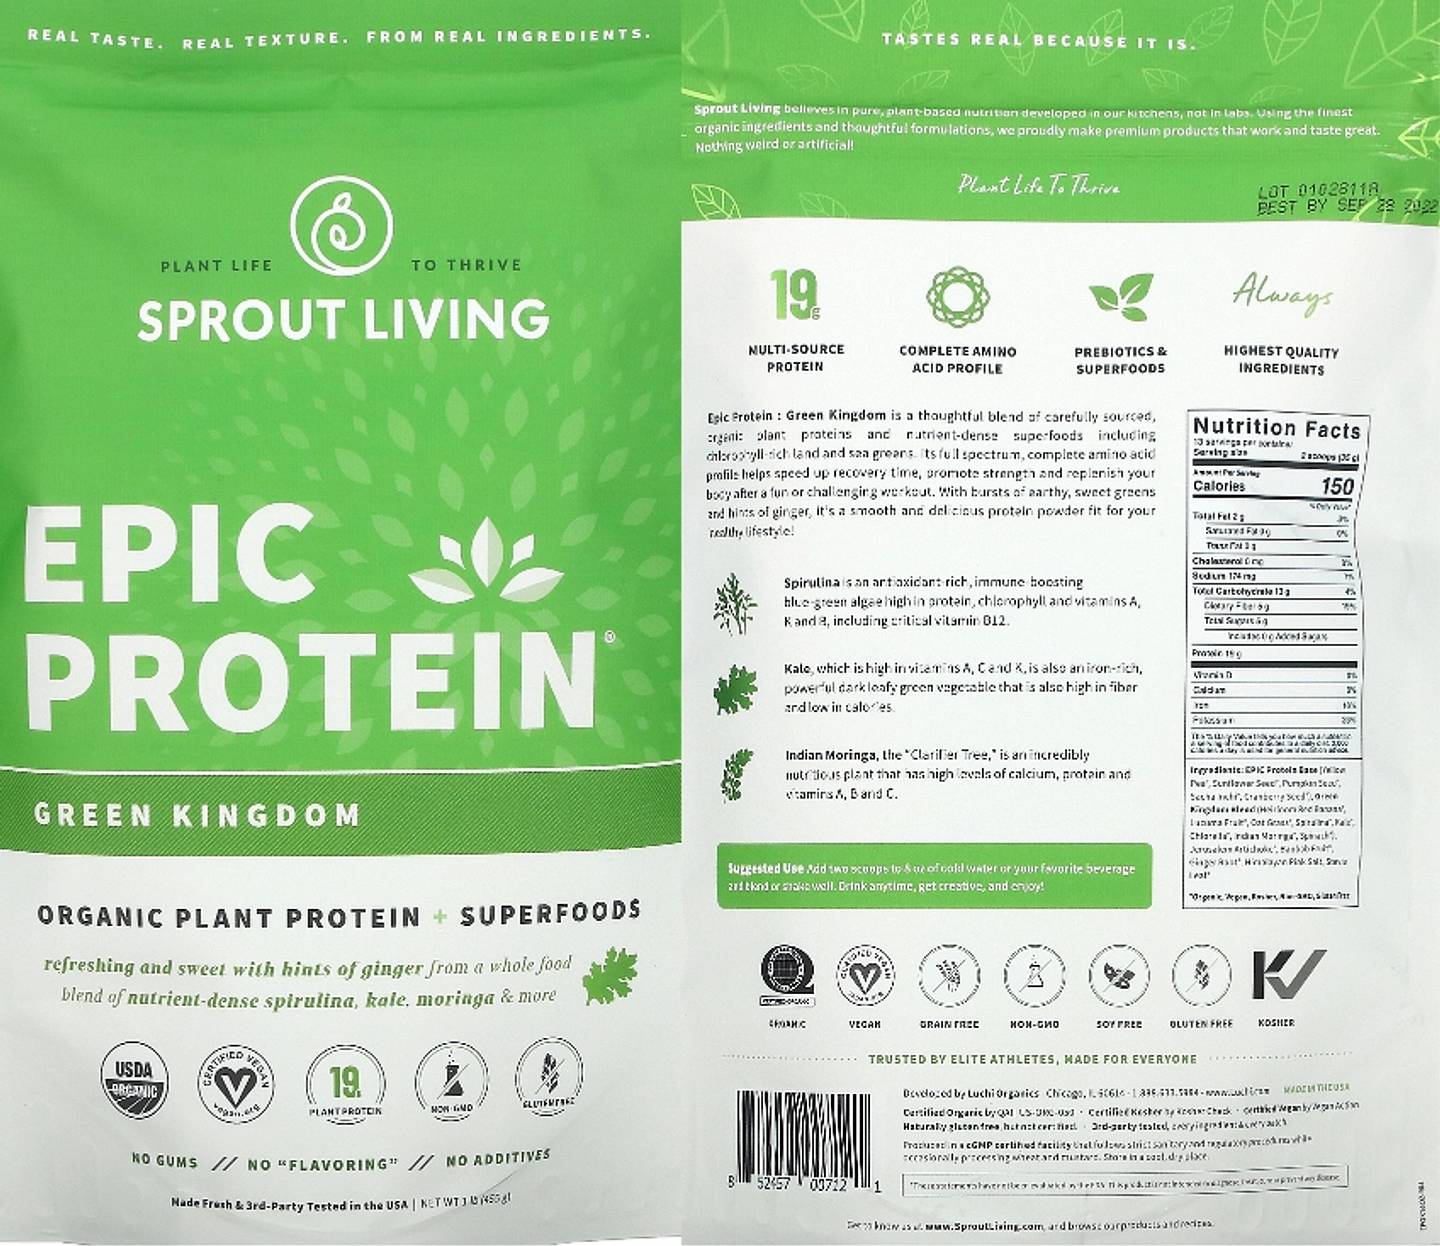 Sprout Living, Epic Protein, Organic Plant Protein + Superfoods, Green Kingdom label